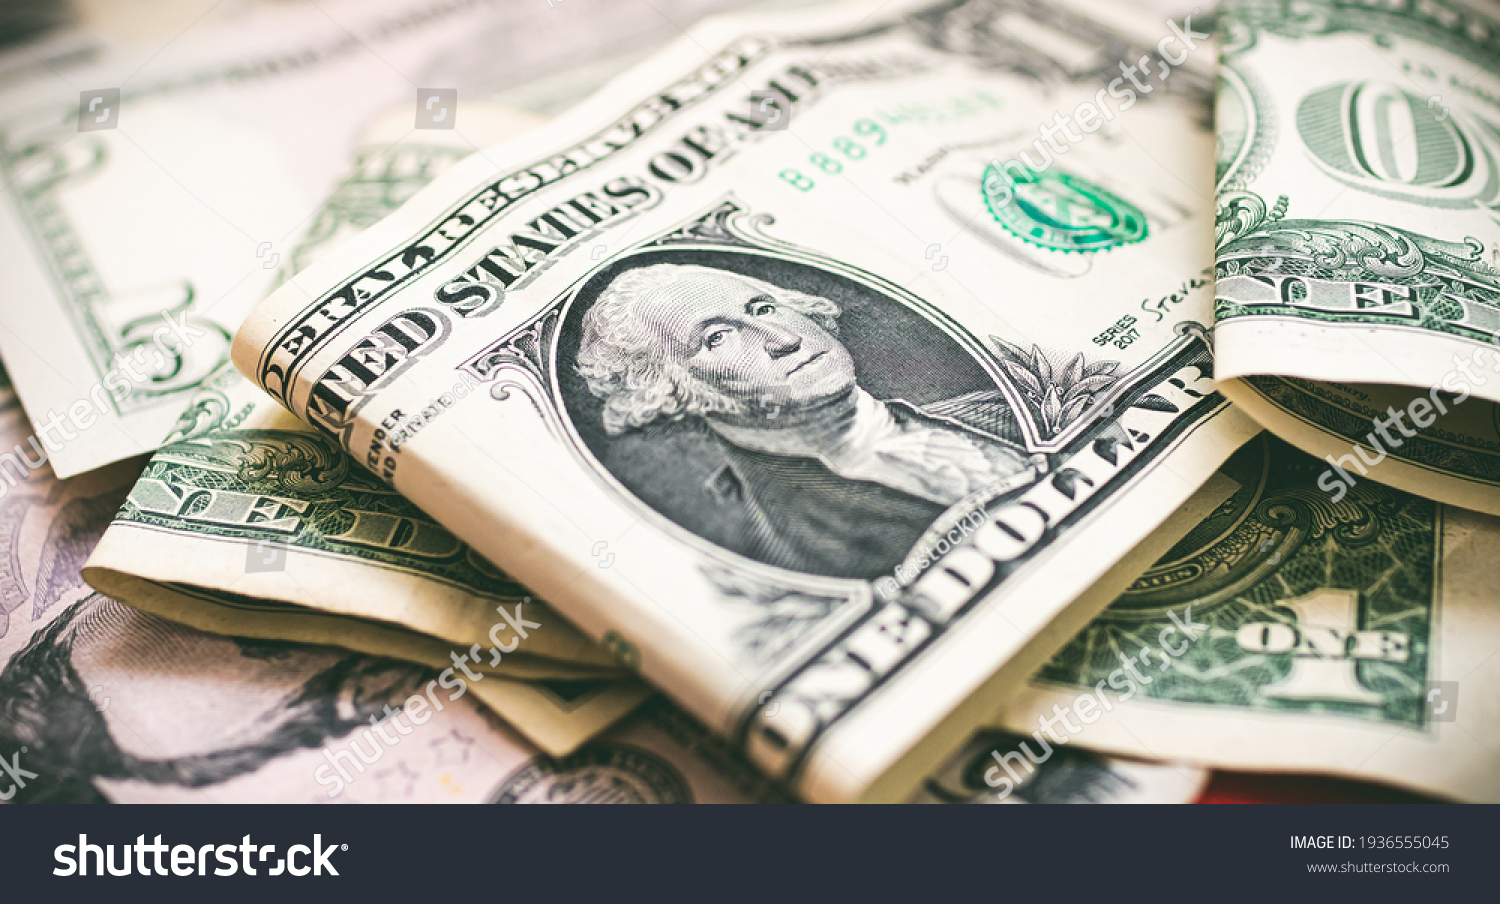 Money, US dollar bills background. Money scattered on the desk. Photography for Finance and Economy concepts.  #1936555045